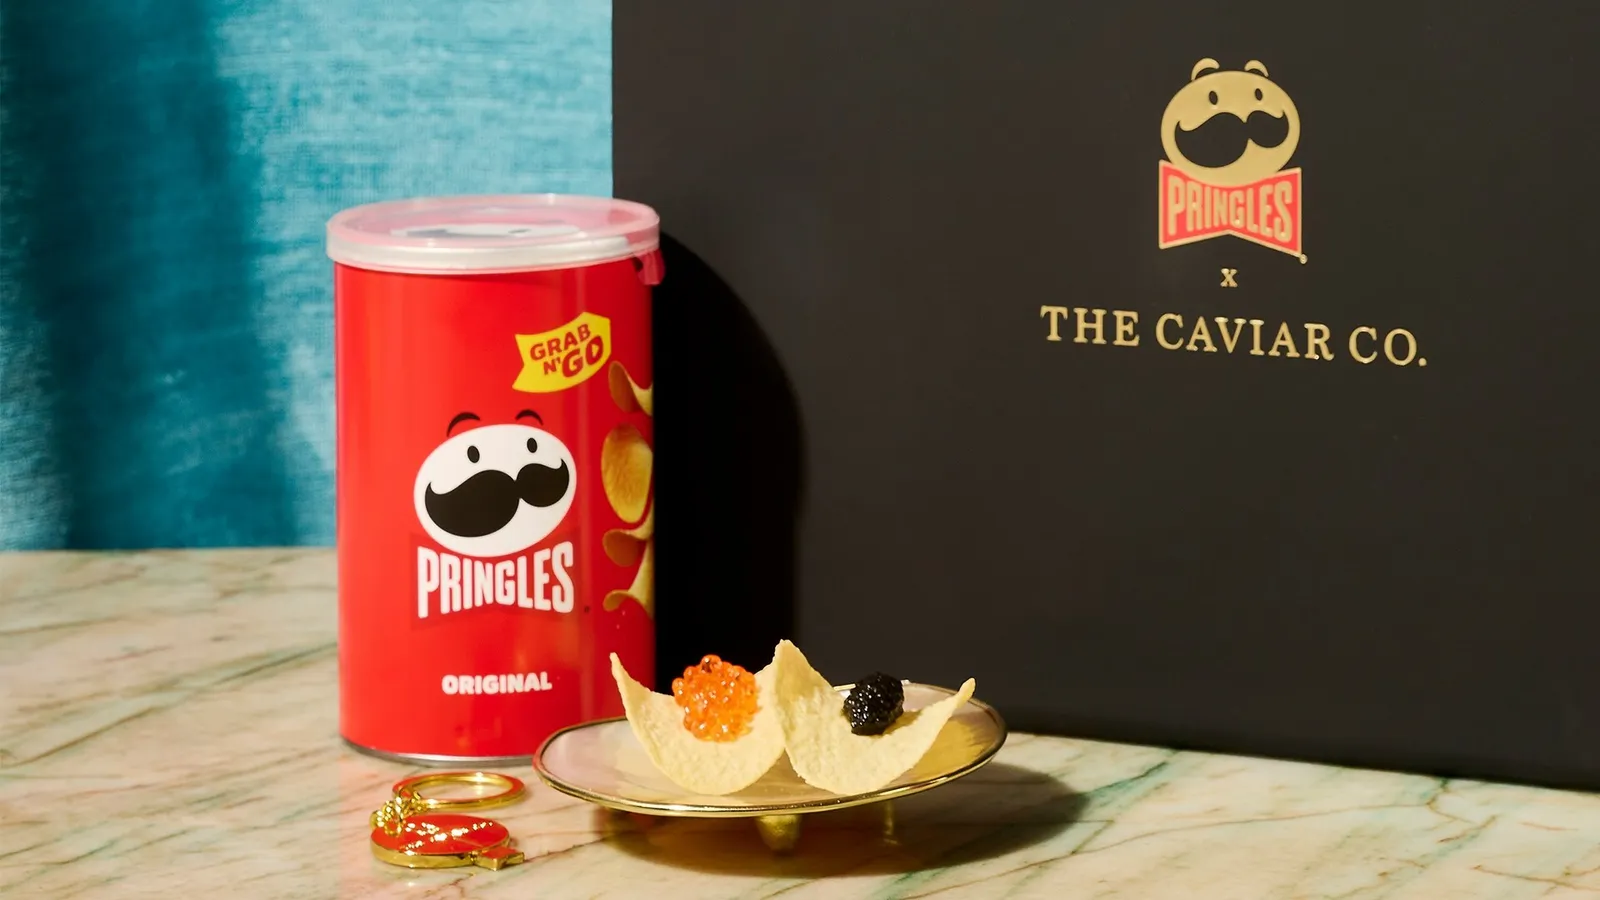 hi-low snacking experiential concept